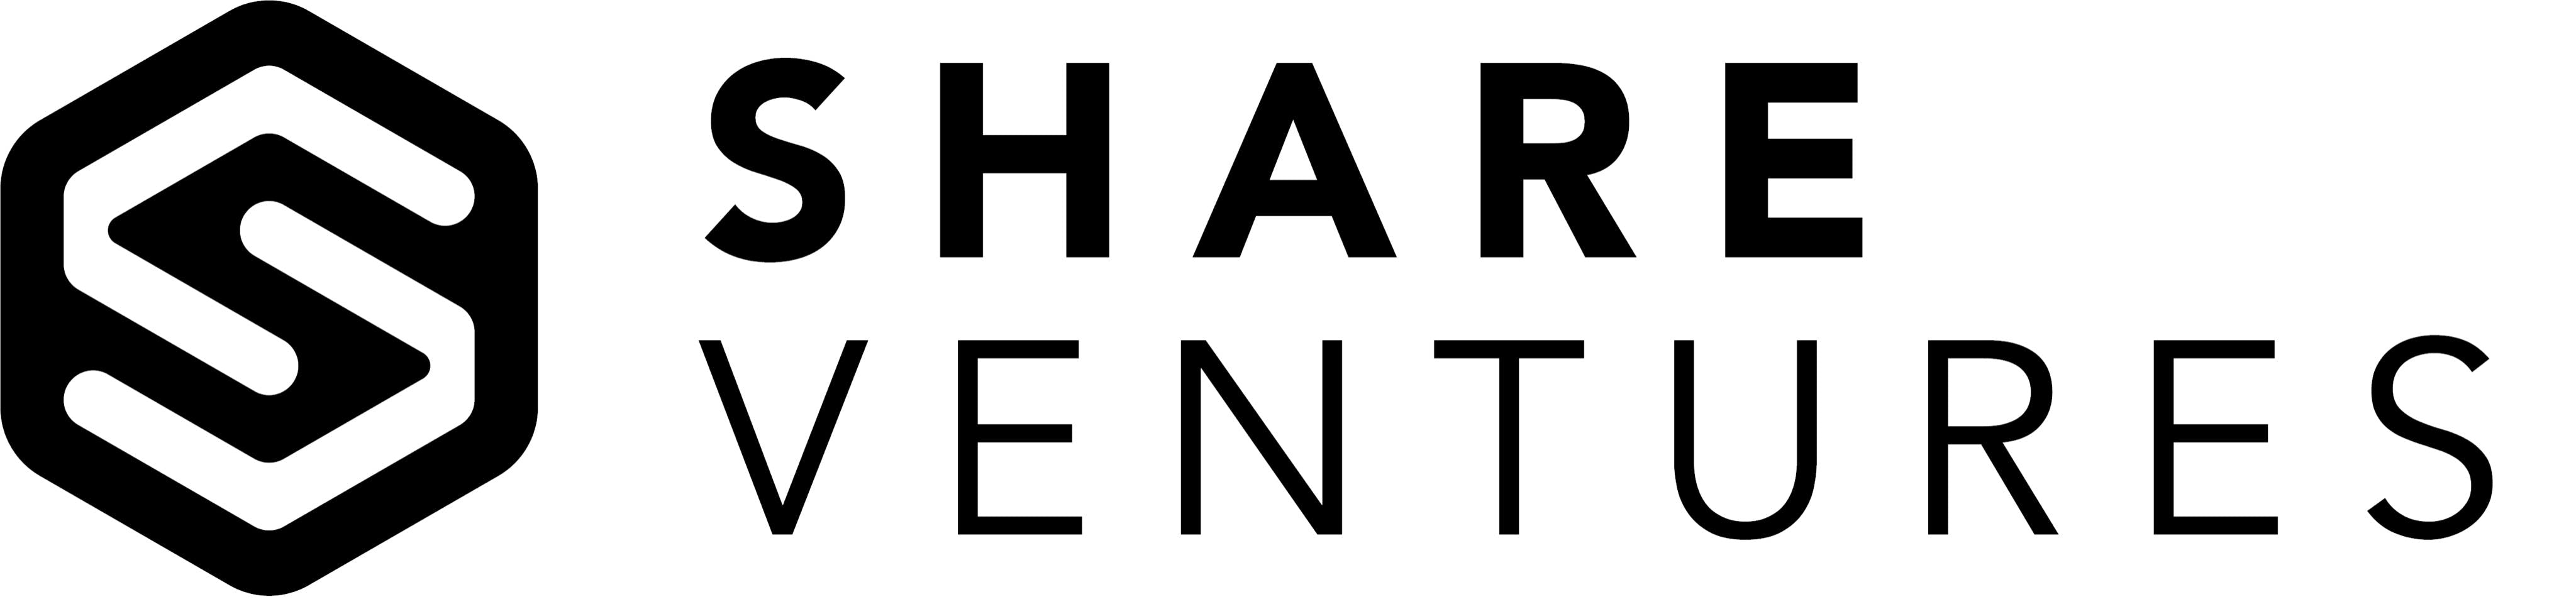 Share Ventures Horizontal_b_on_w.png